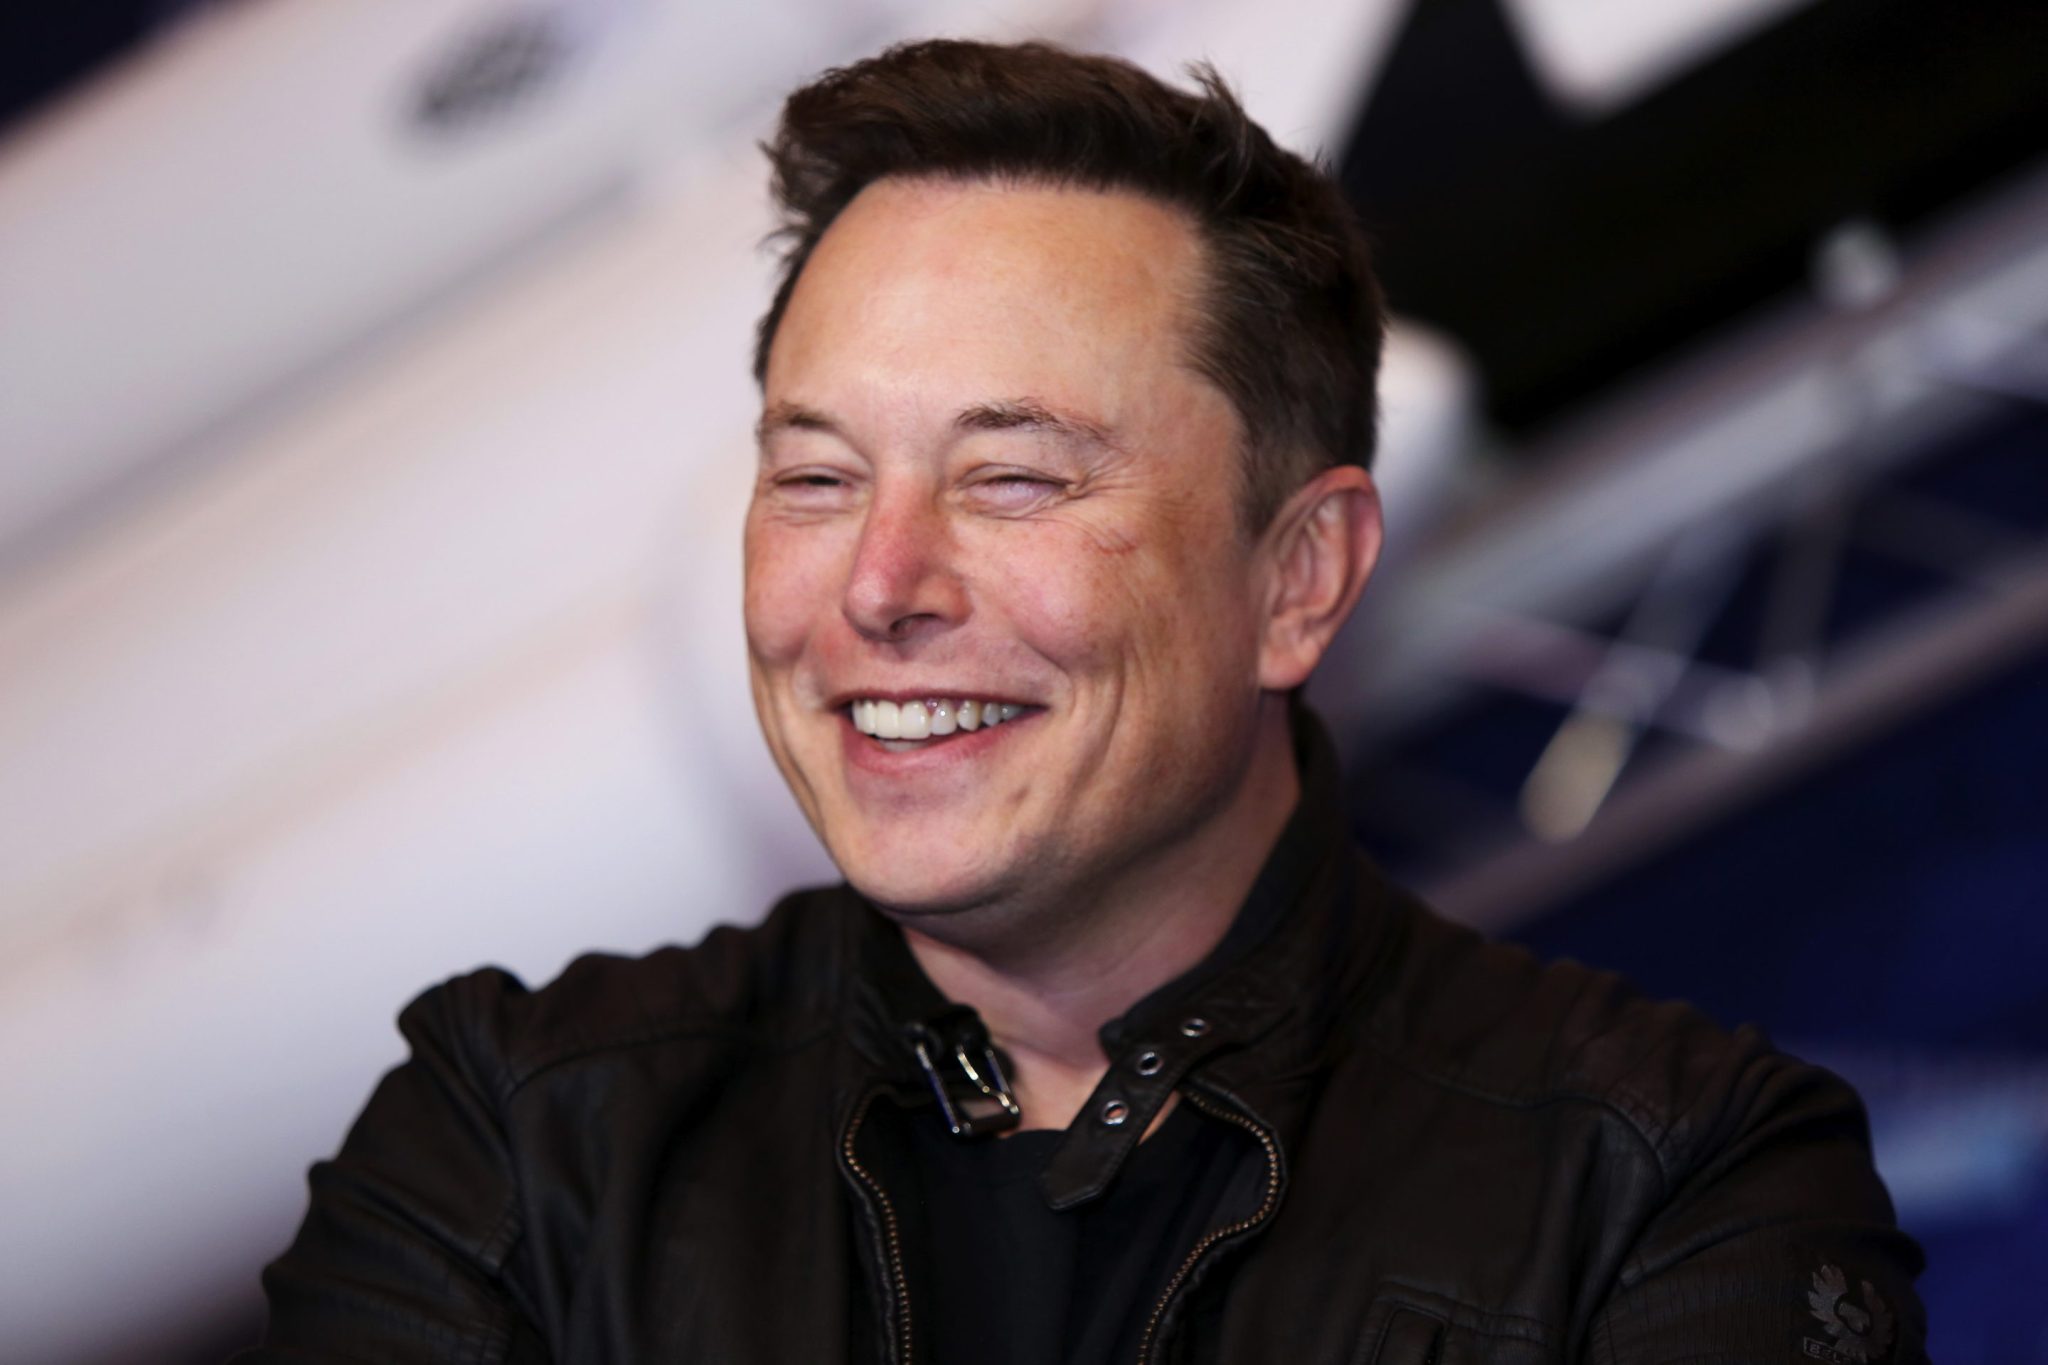 tesla lost over $700 billion in value since november 2021 and elon musk wants $45 billion for his performance as ceo